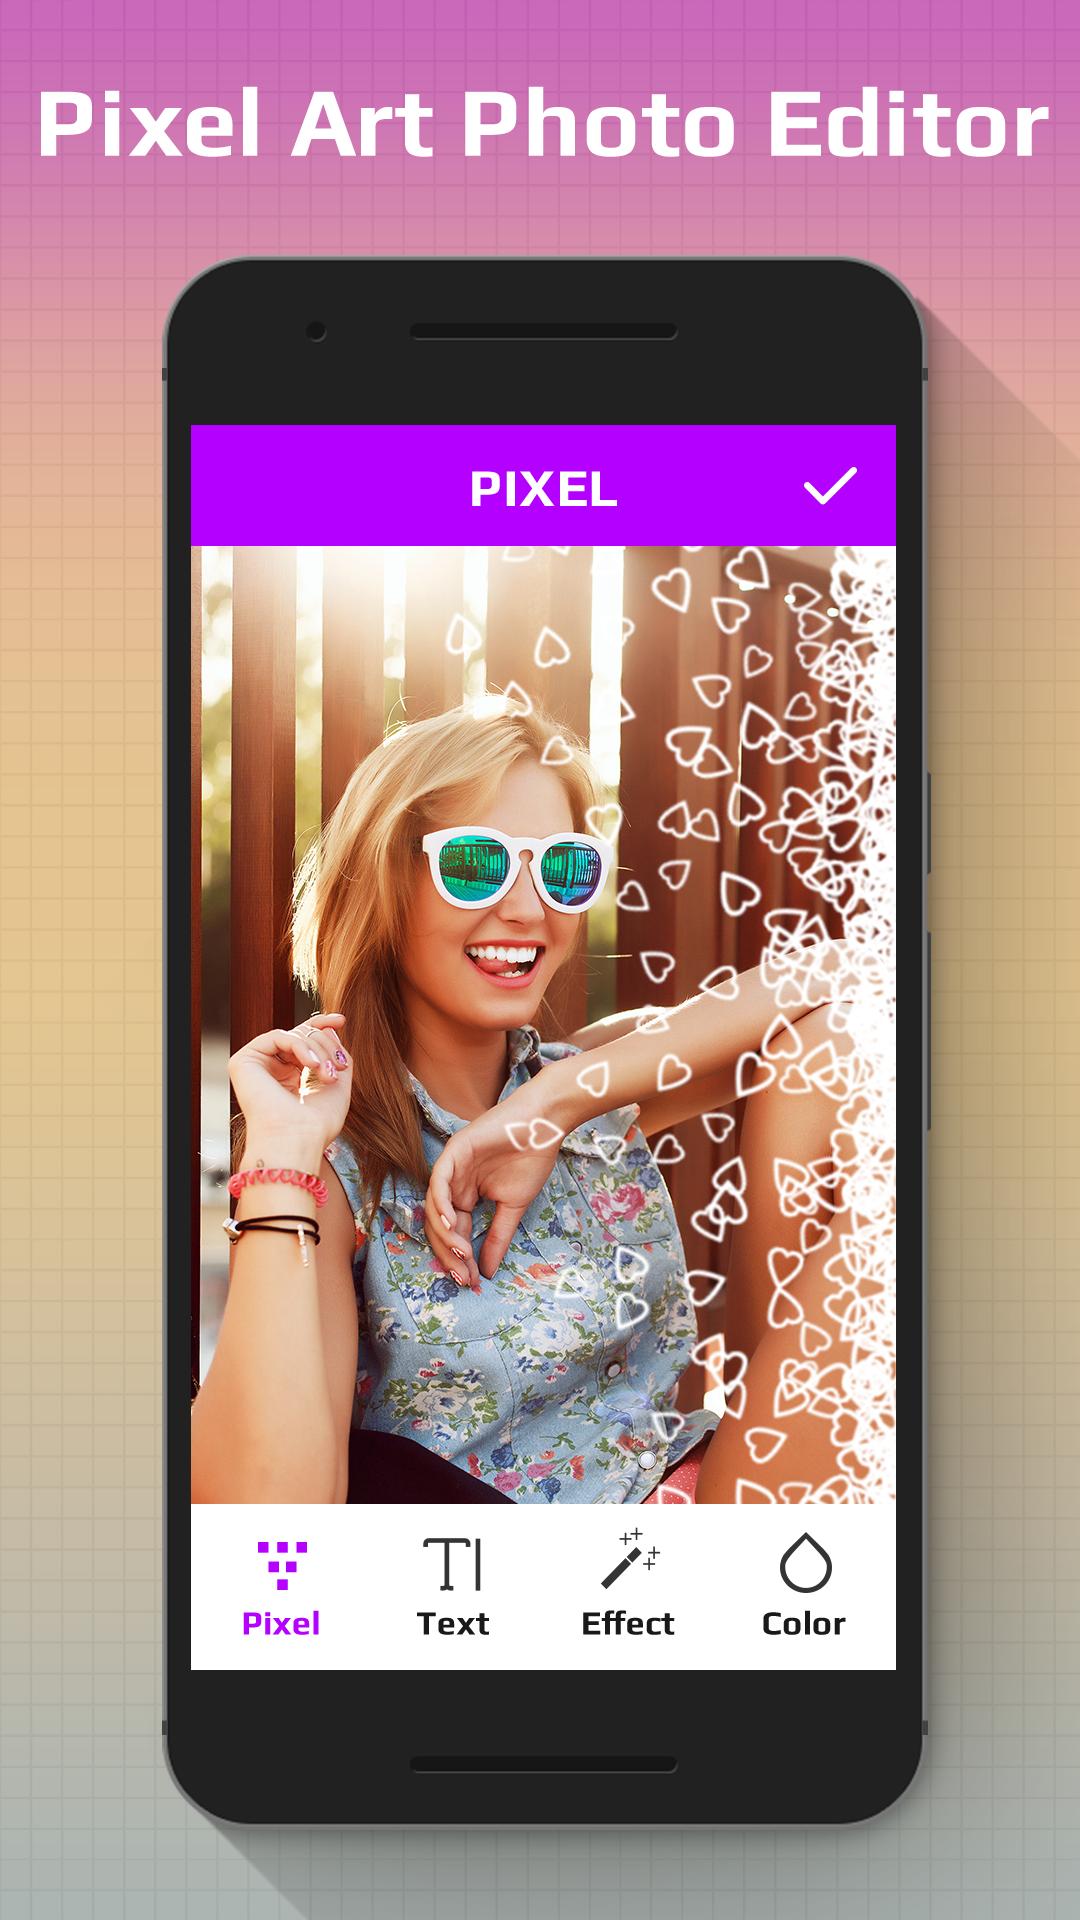 Pixel Art Photo Editor 2018 for Android - APK Download